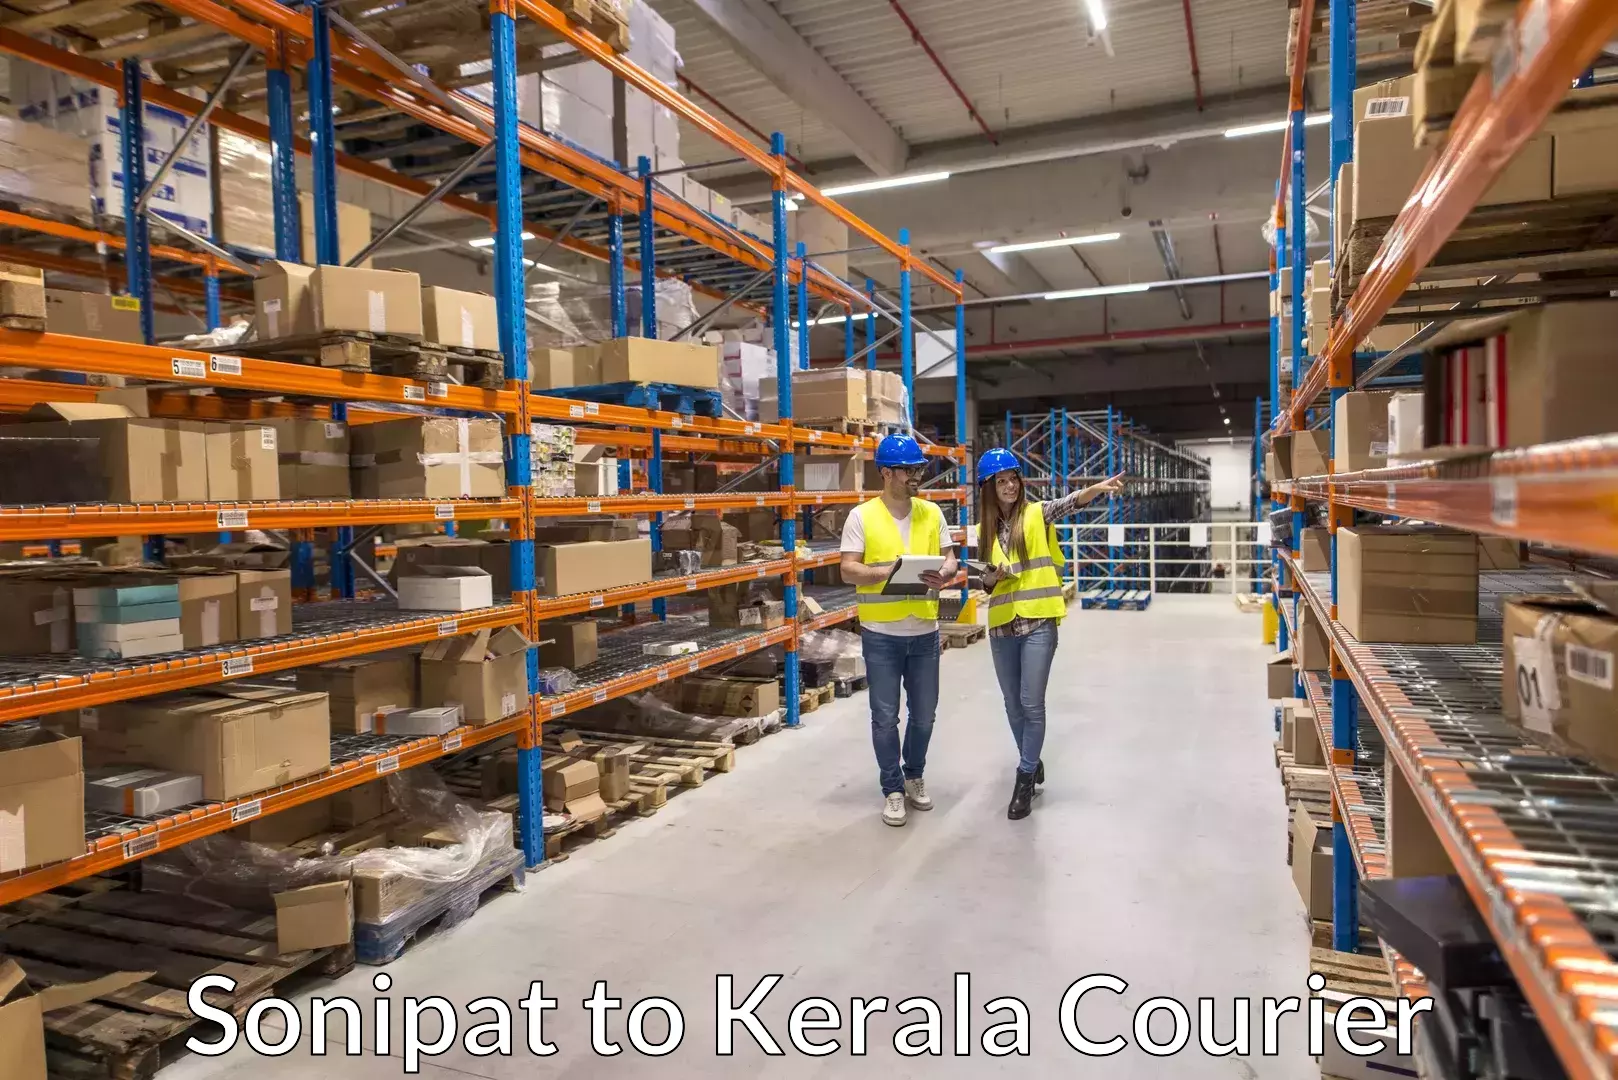 Luggage delivery network Sonipat to Kerala